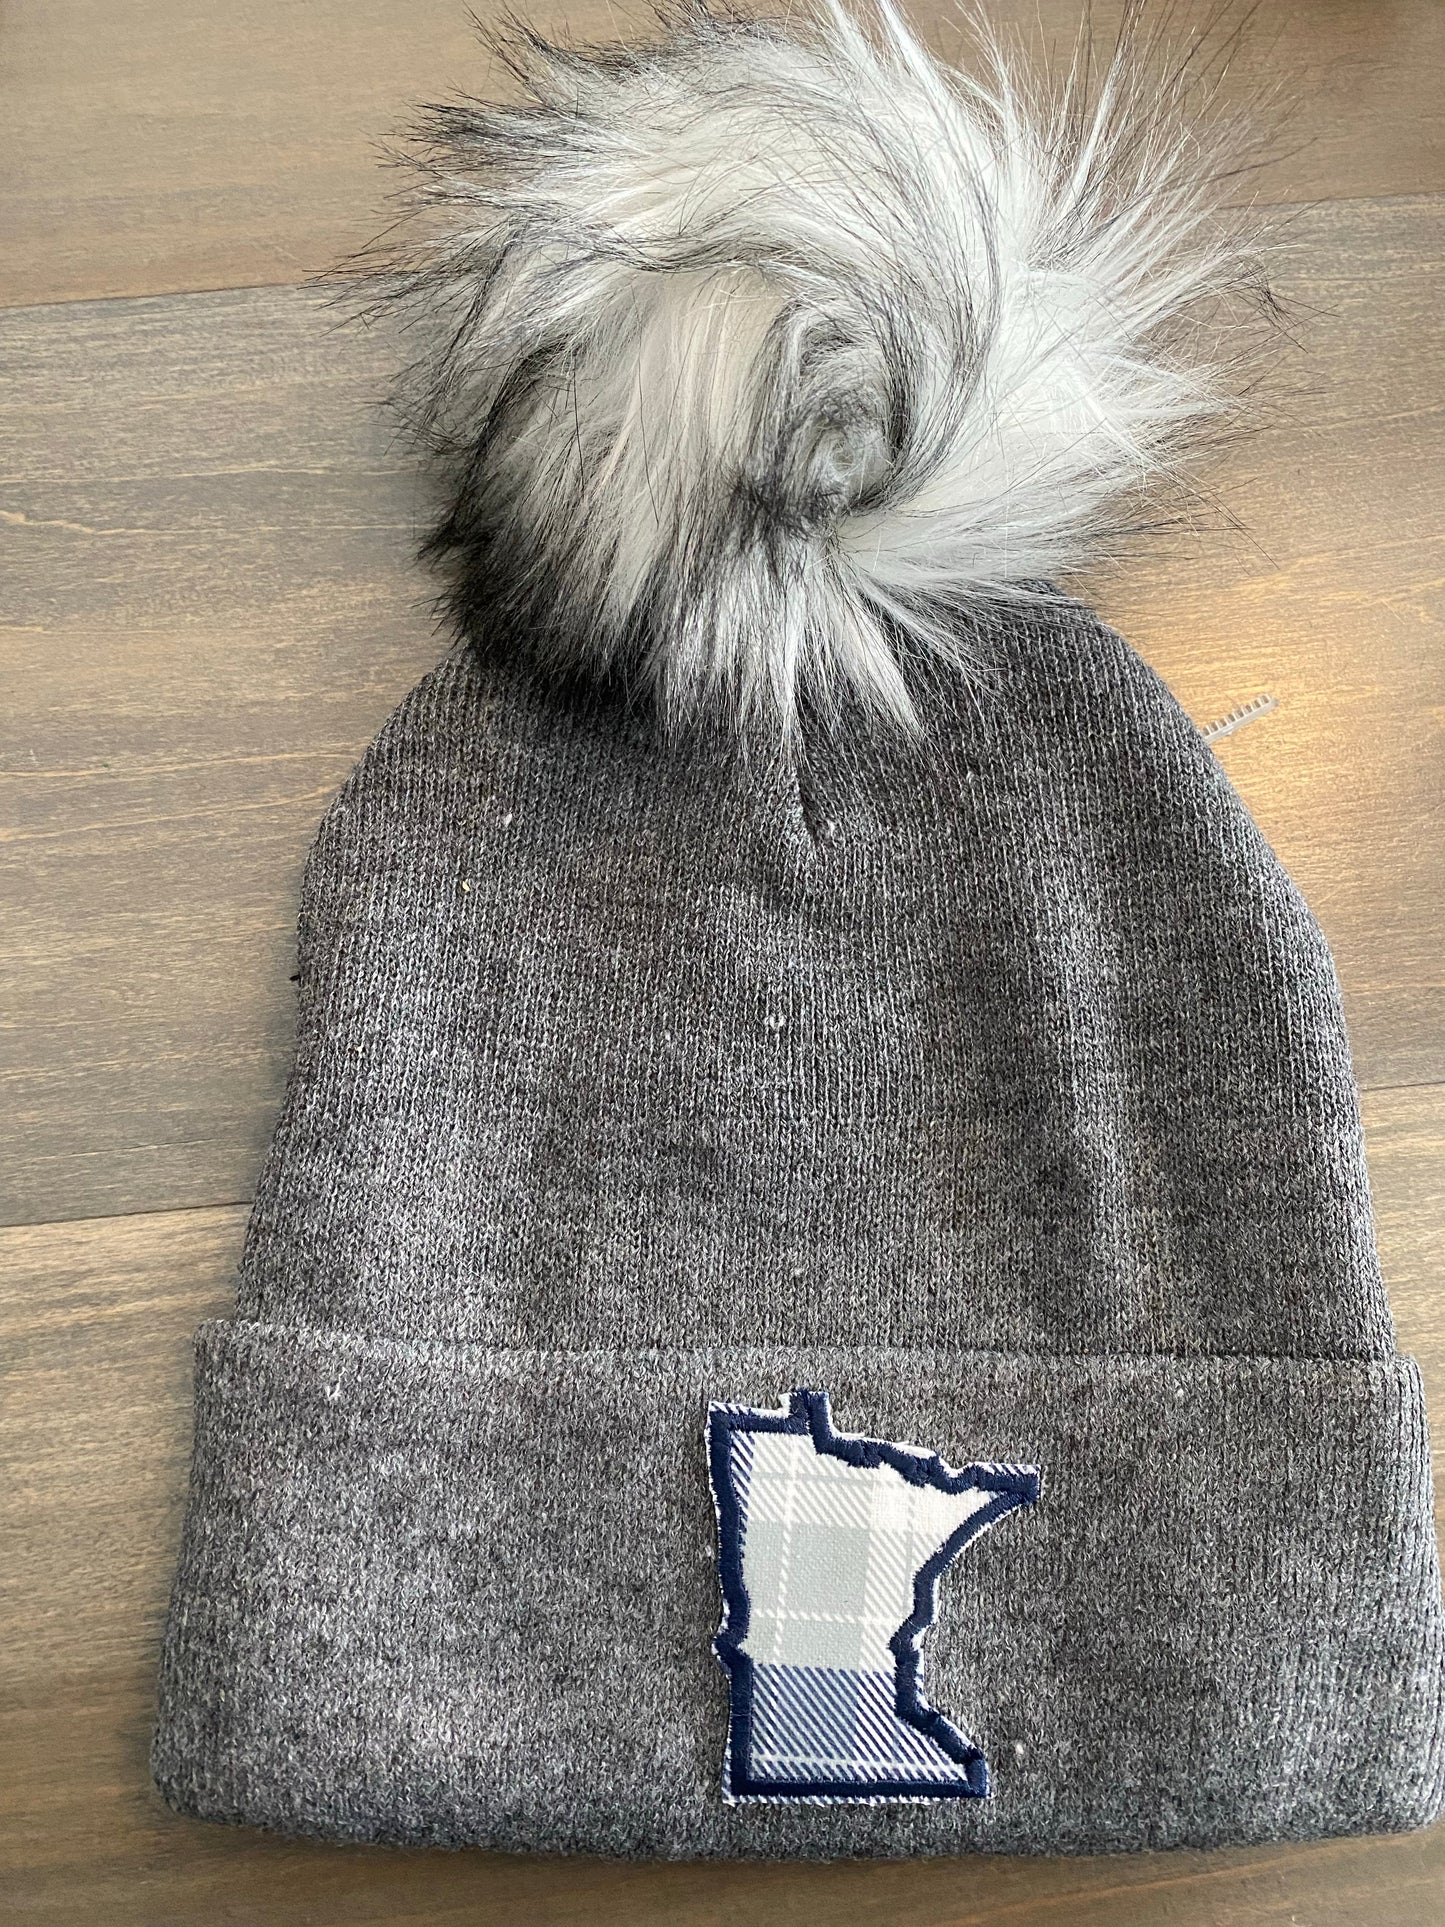 PL beanie stocking cap. MN state patch hat